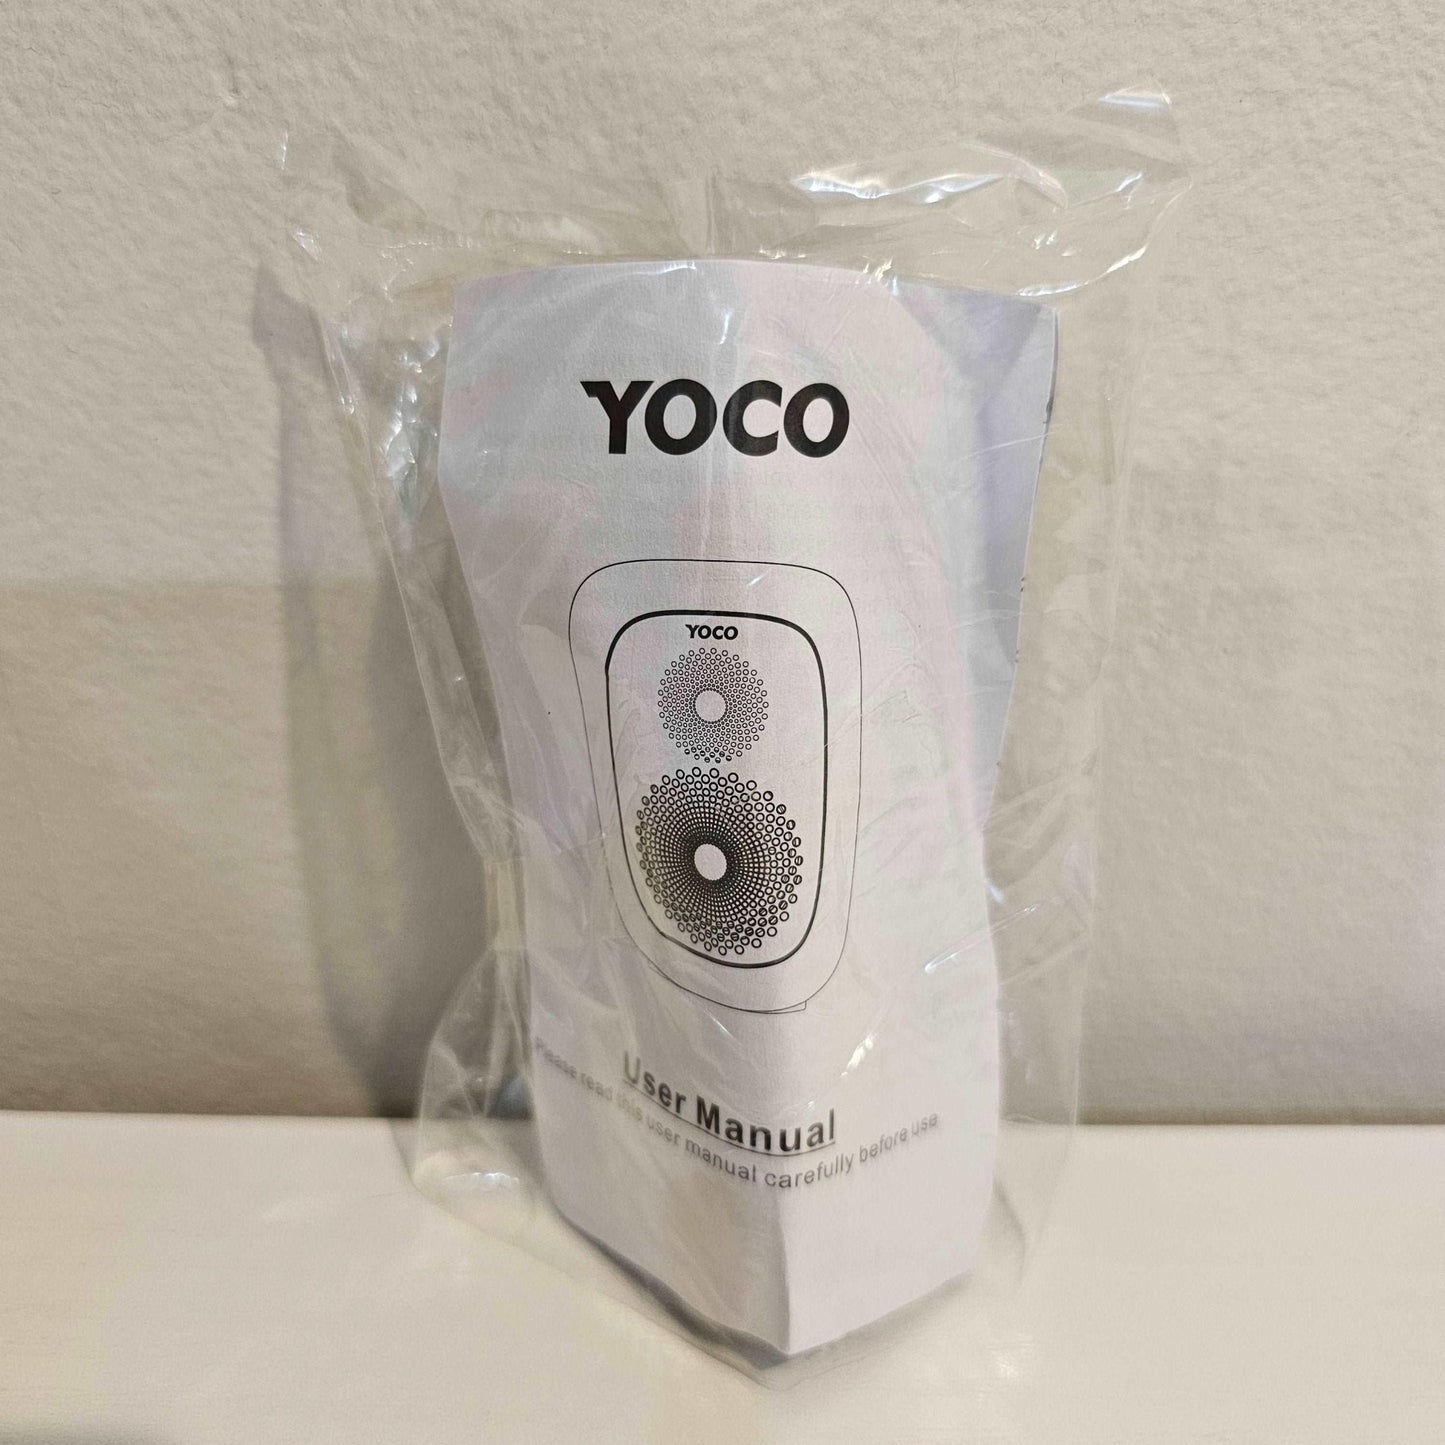 Yoco Y408 Wireless Bluetooth Speaker with RGB LED Lights, FM Radio, and TF-Card Support - DQ Distribution